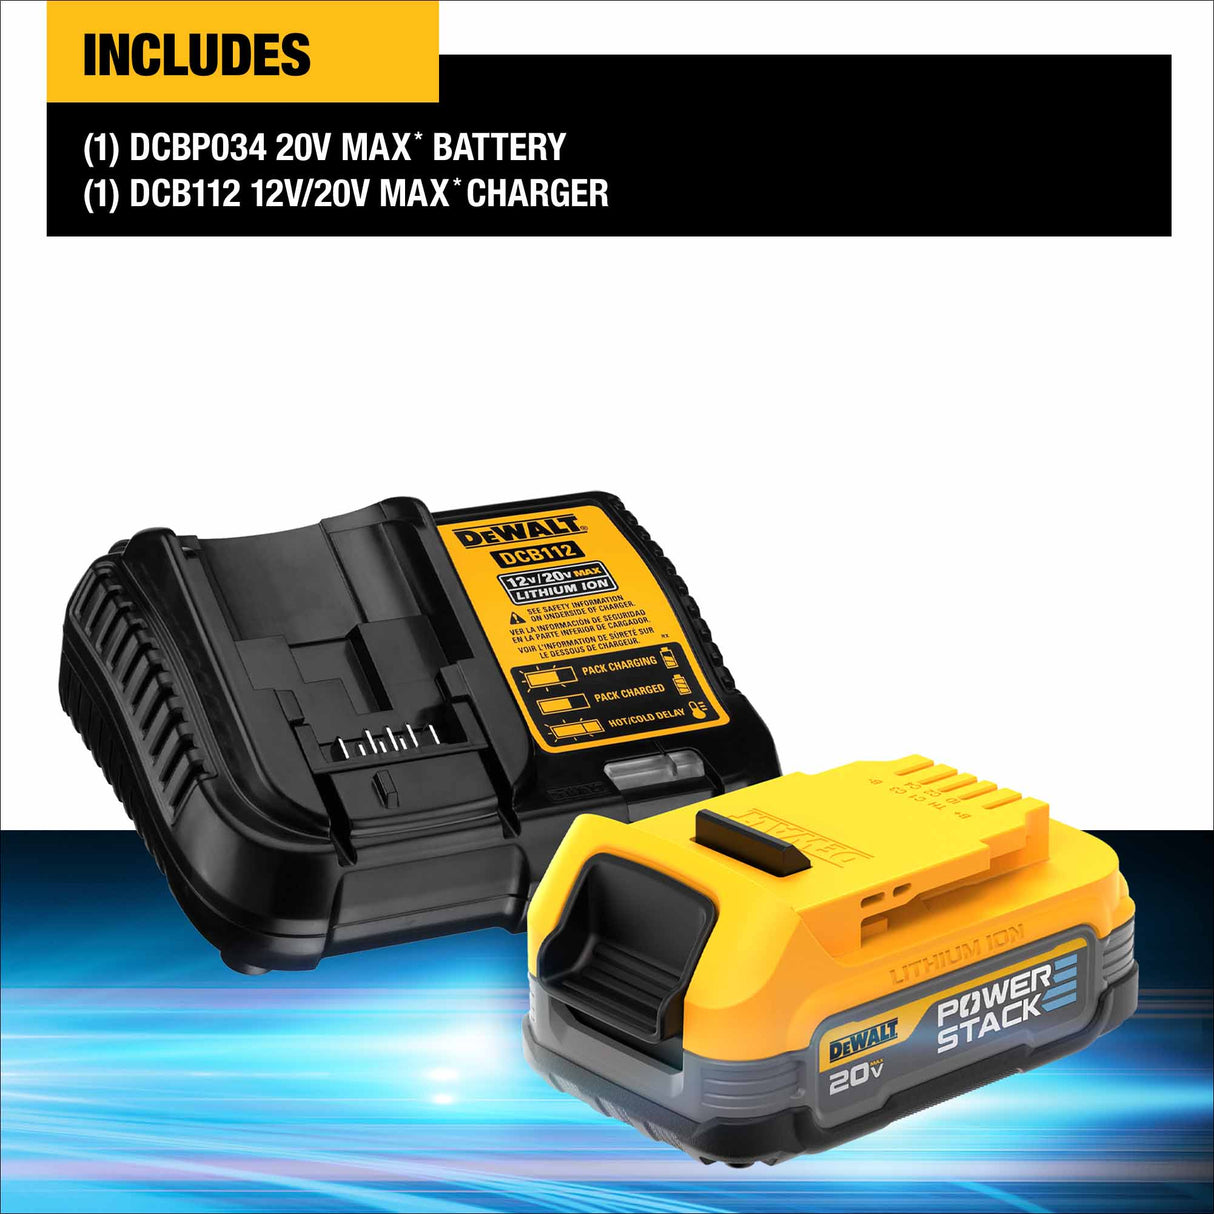 DeWalt DCBP034C 20V MAX Starter Kit with Powerstack Compact Battery and Charger - 14